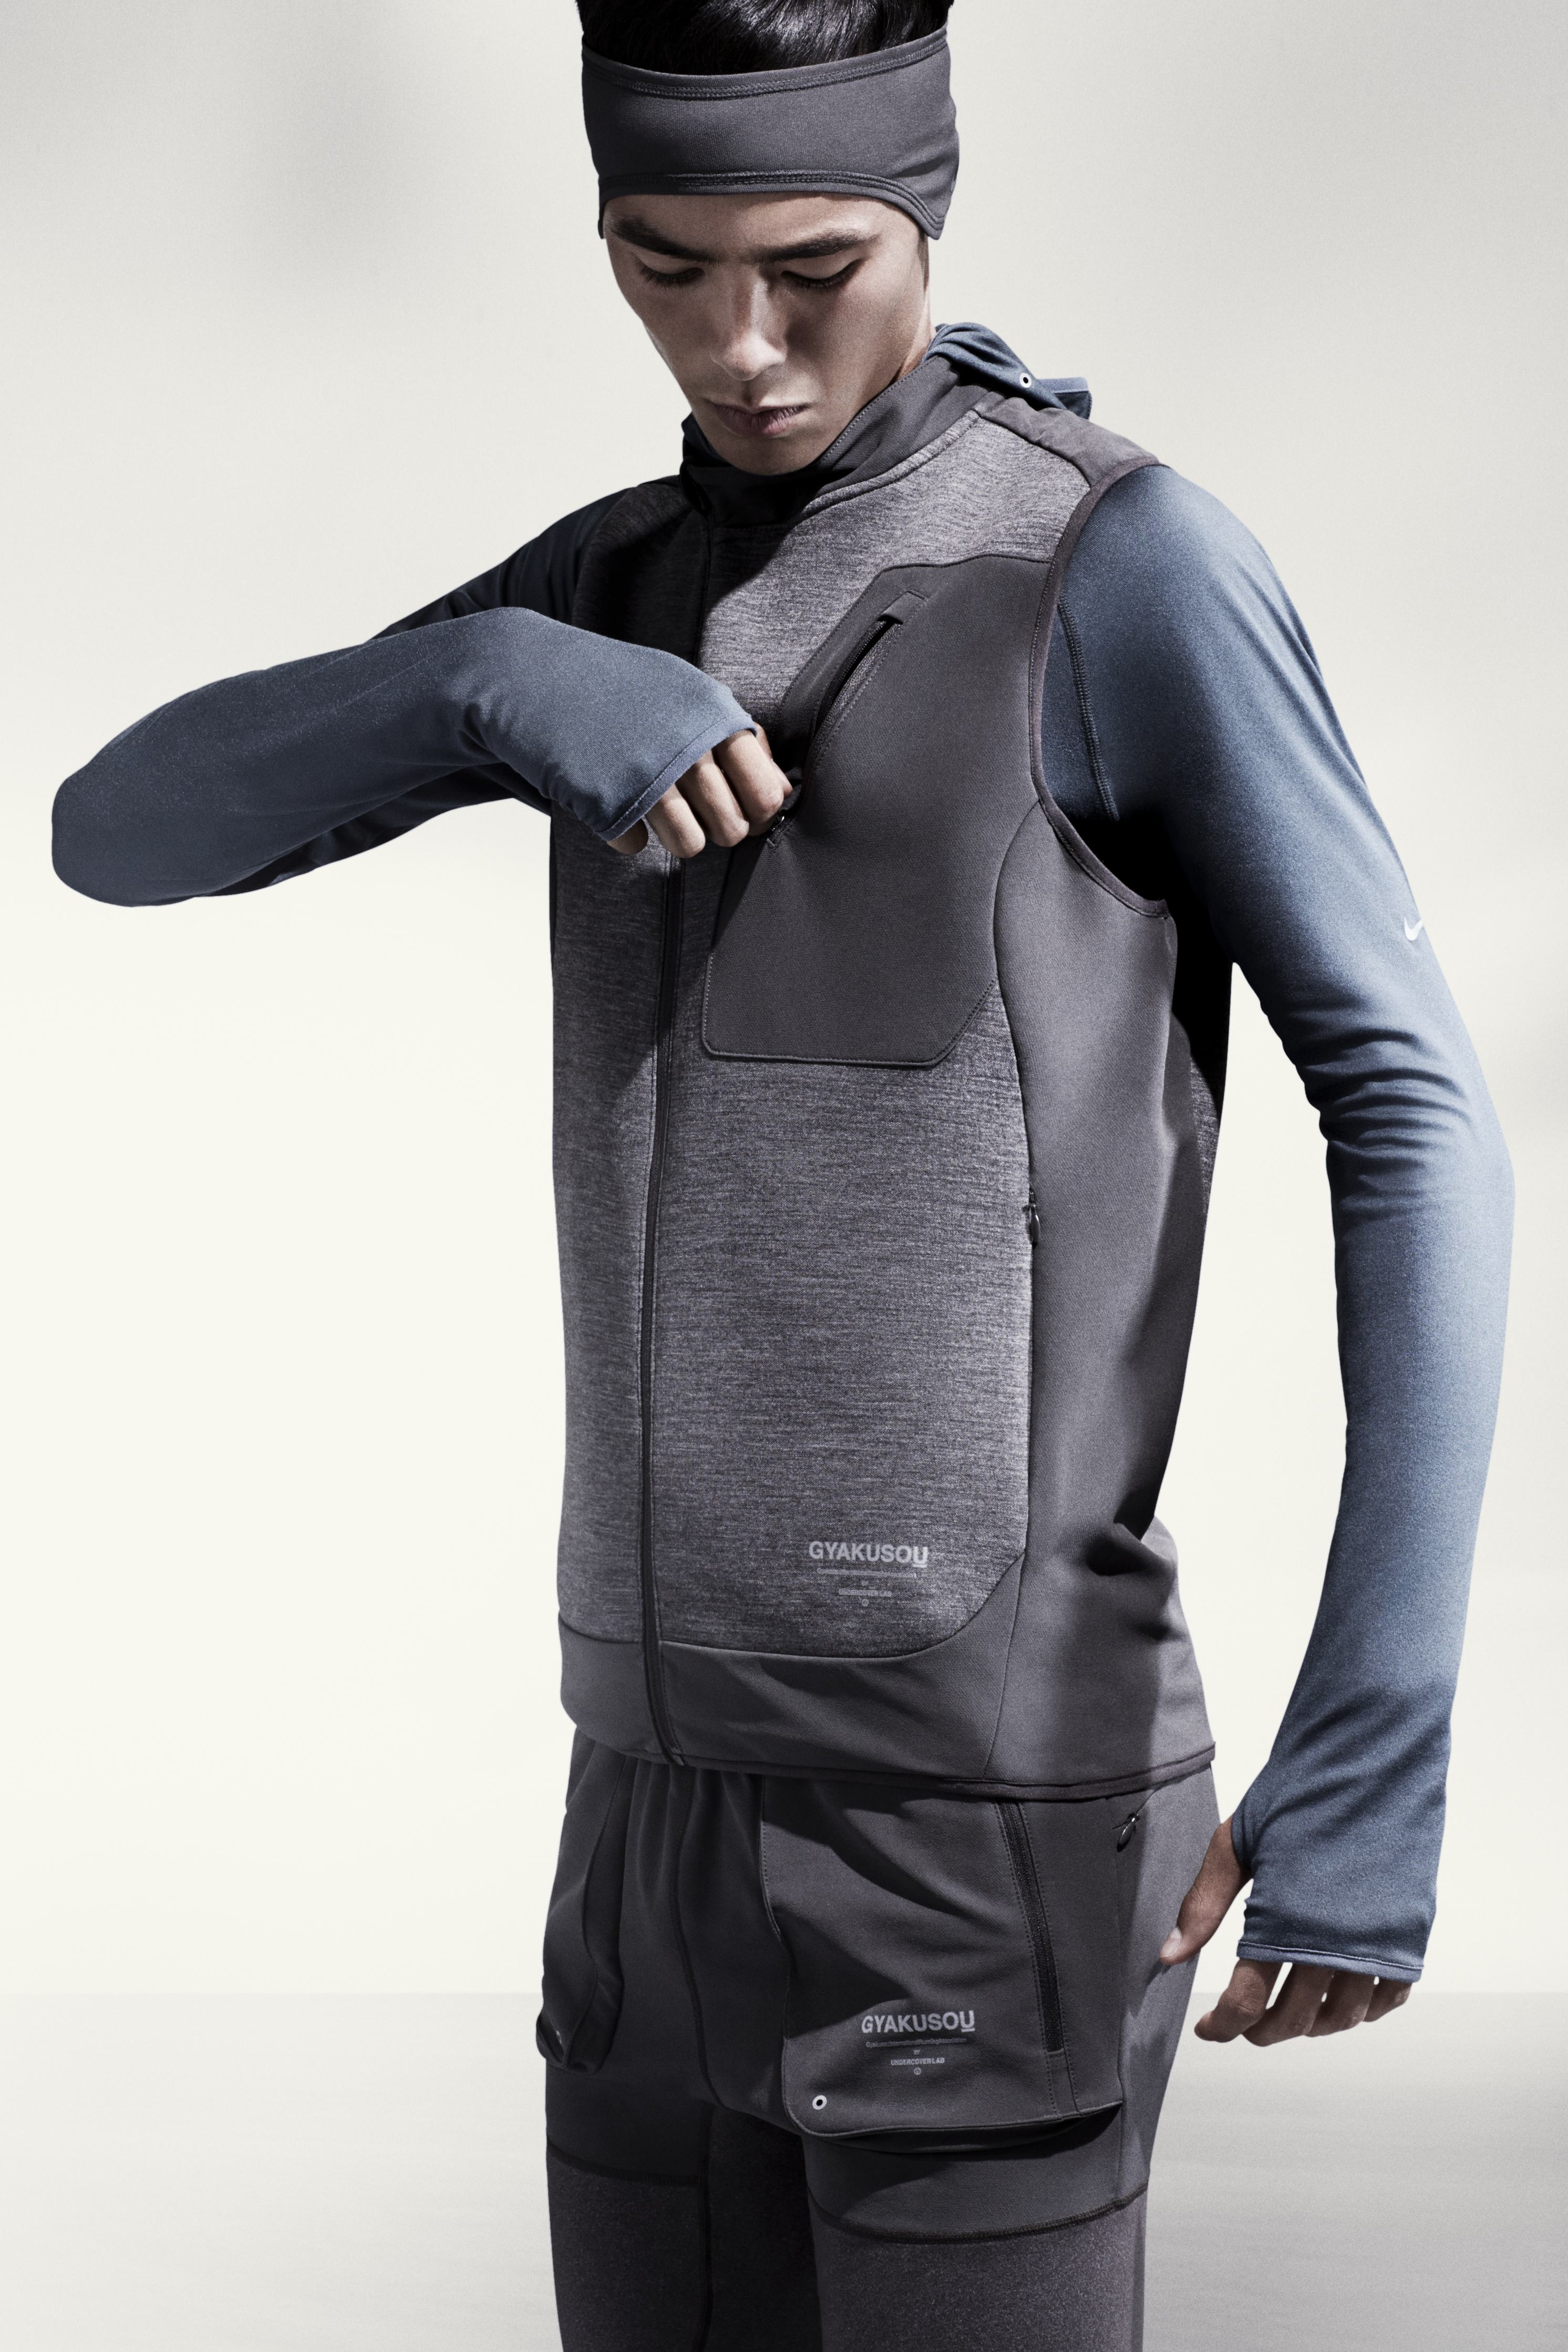 Decorativo parque Tiranía BMF Running: Nike x Undercover Gyakusou Holiday 2014 Collection - Hardwood  and Hollywood